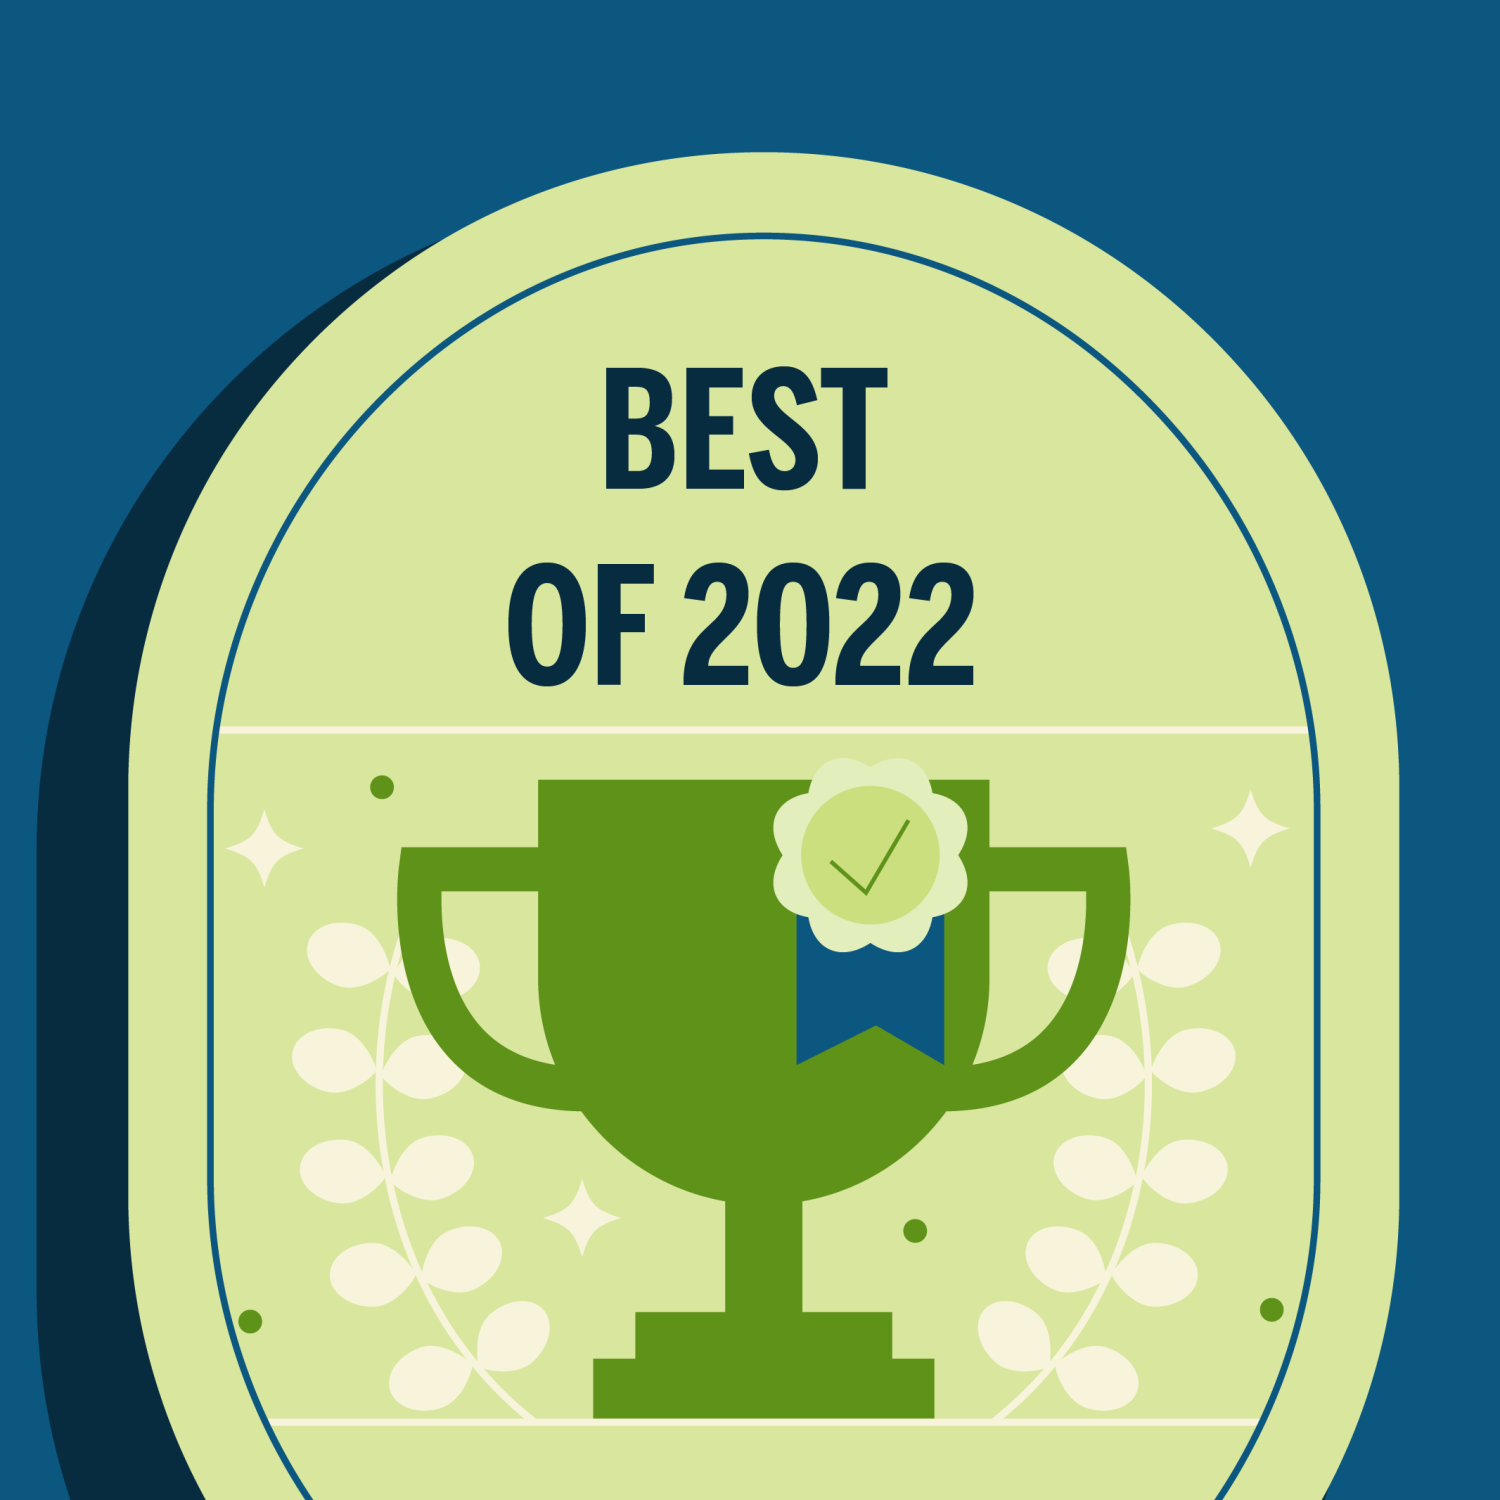 graphic light green oval on blue background with green trophy cup and ribbon with "Best of 2022" on top